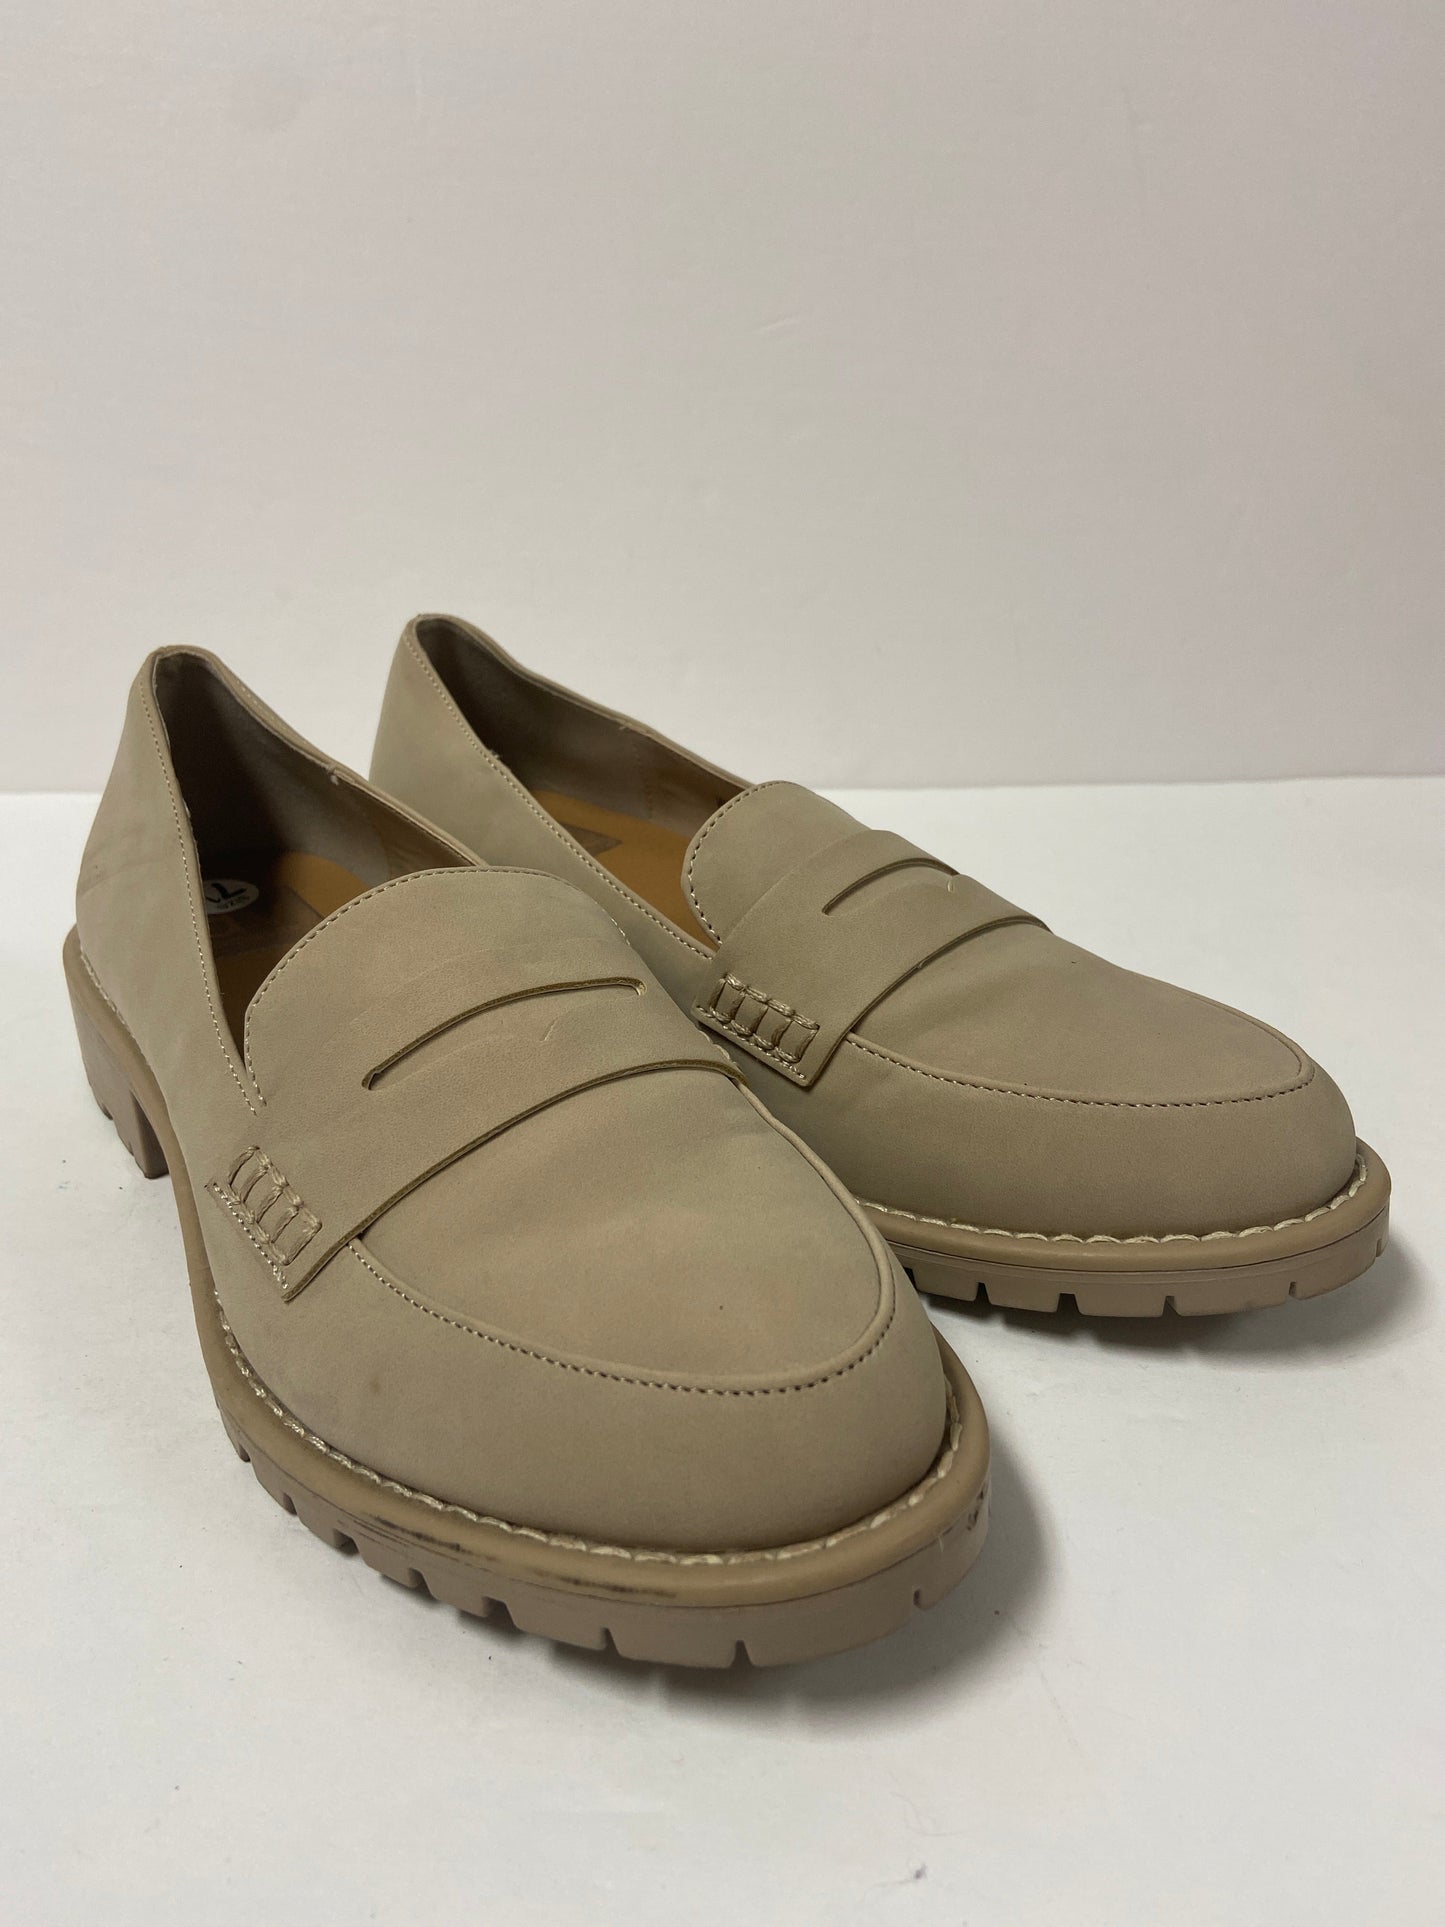 Shoes Flats Loafer Oxford By Dolce Vita  Size: 7.5